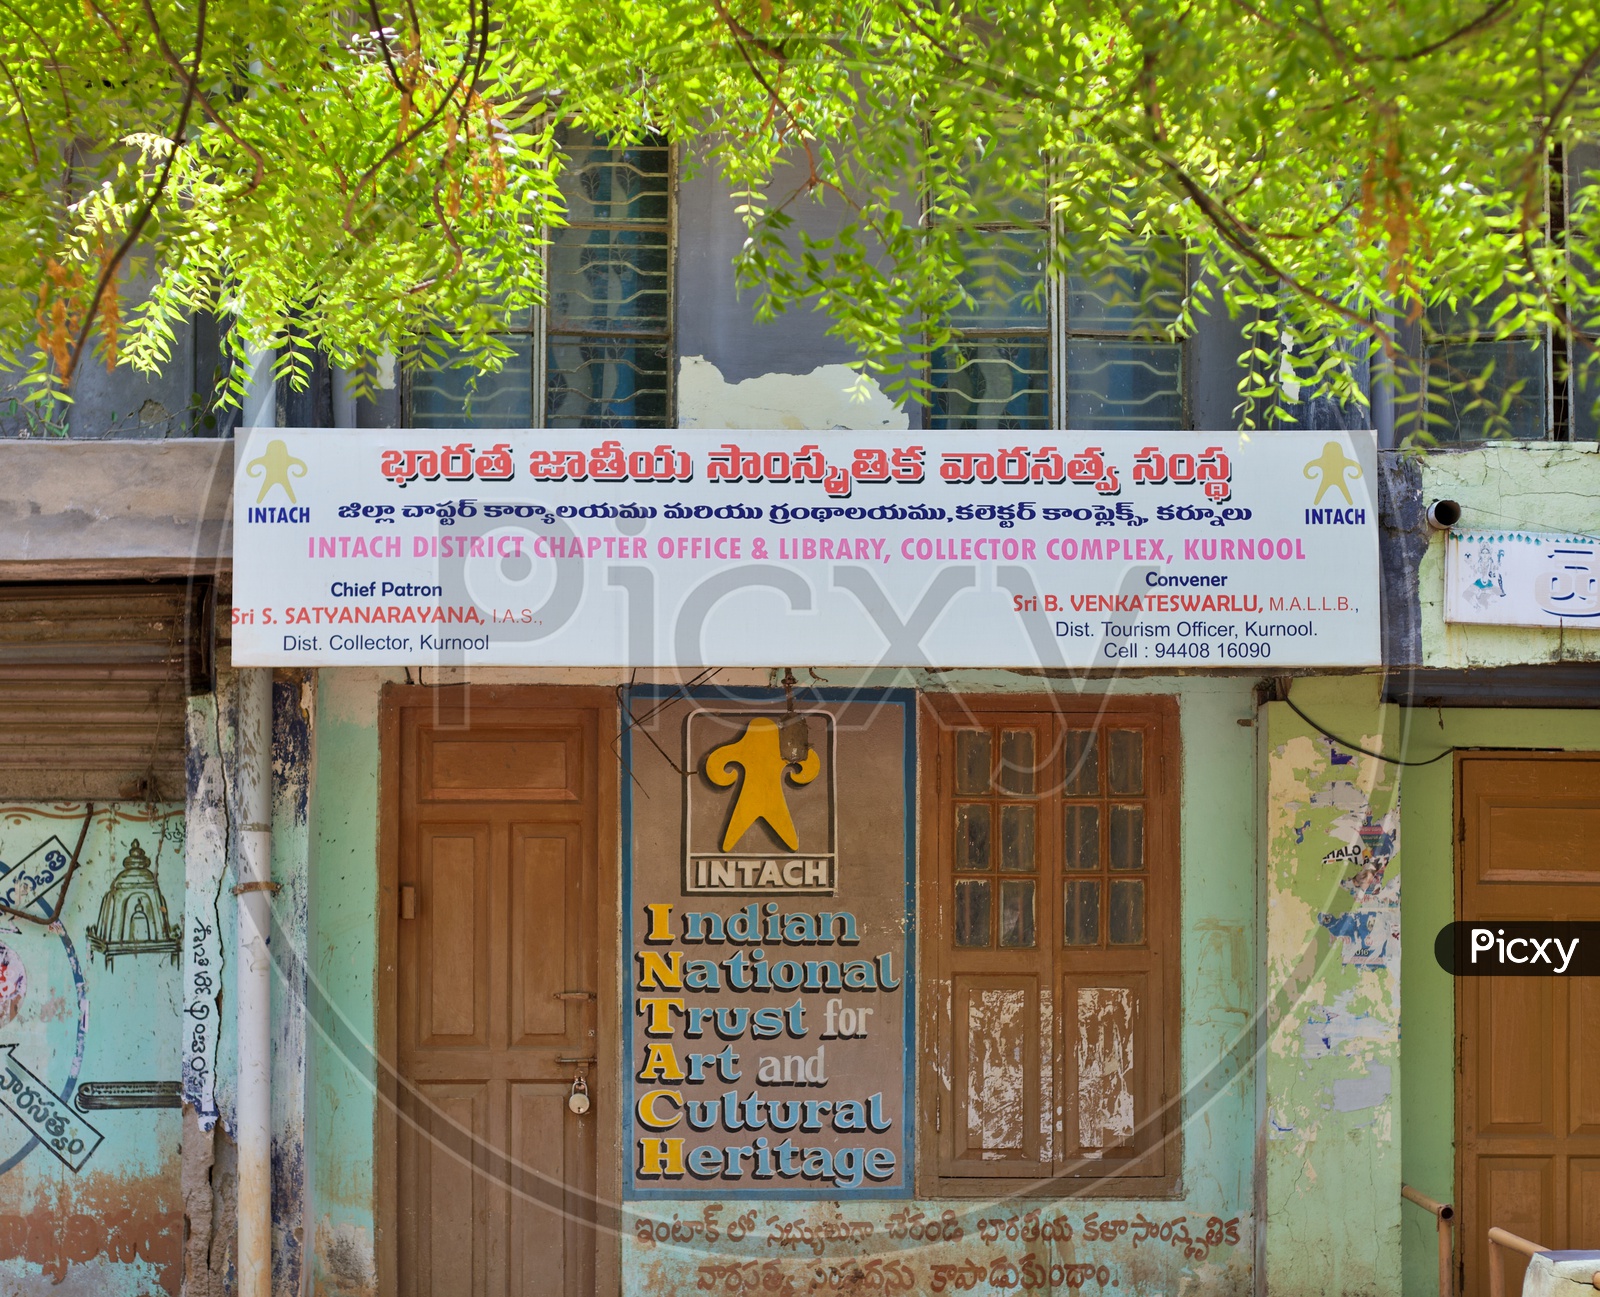 Kurnool district INTACH chapter and library.